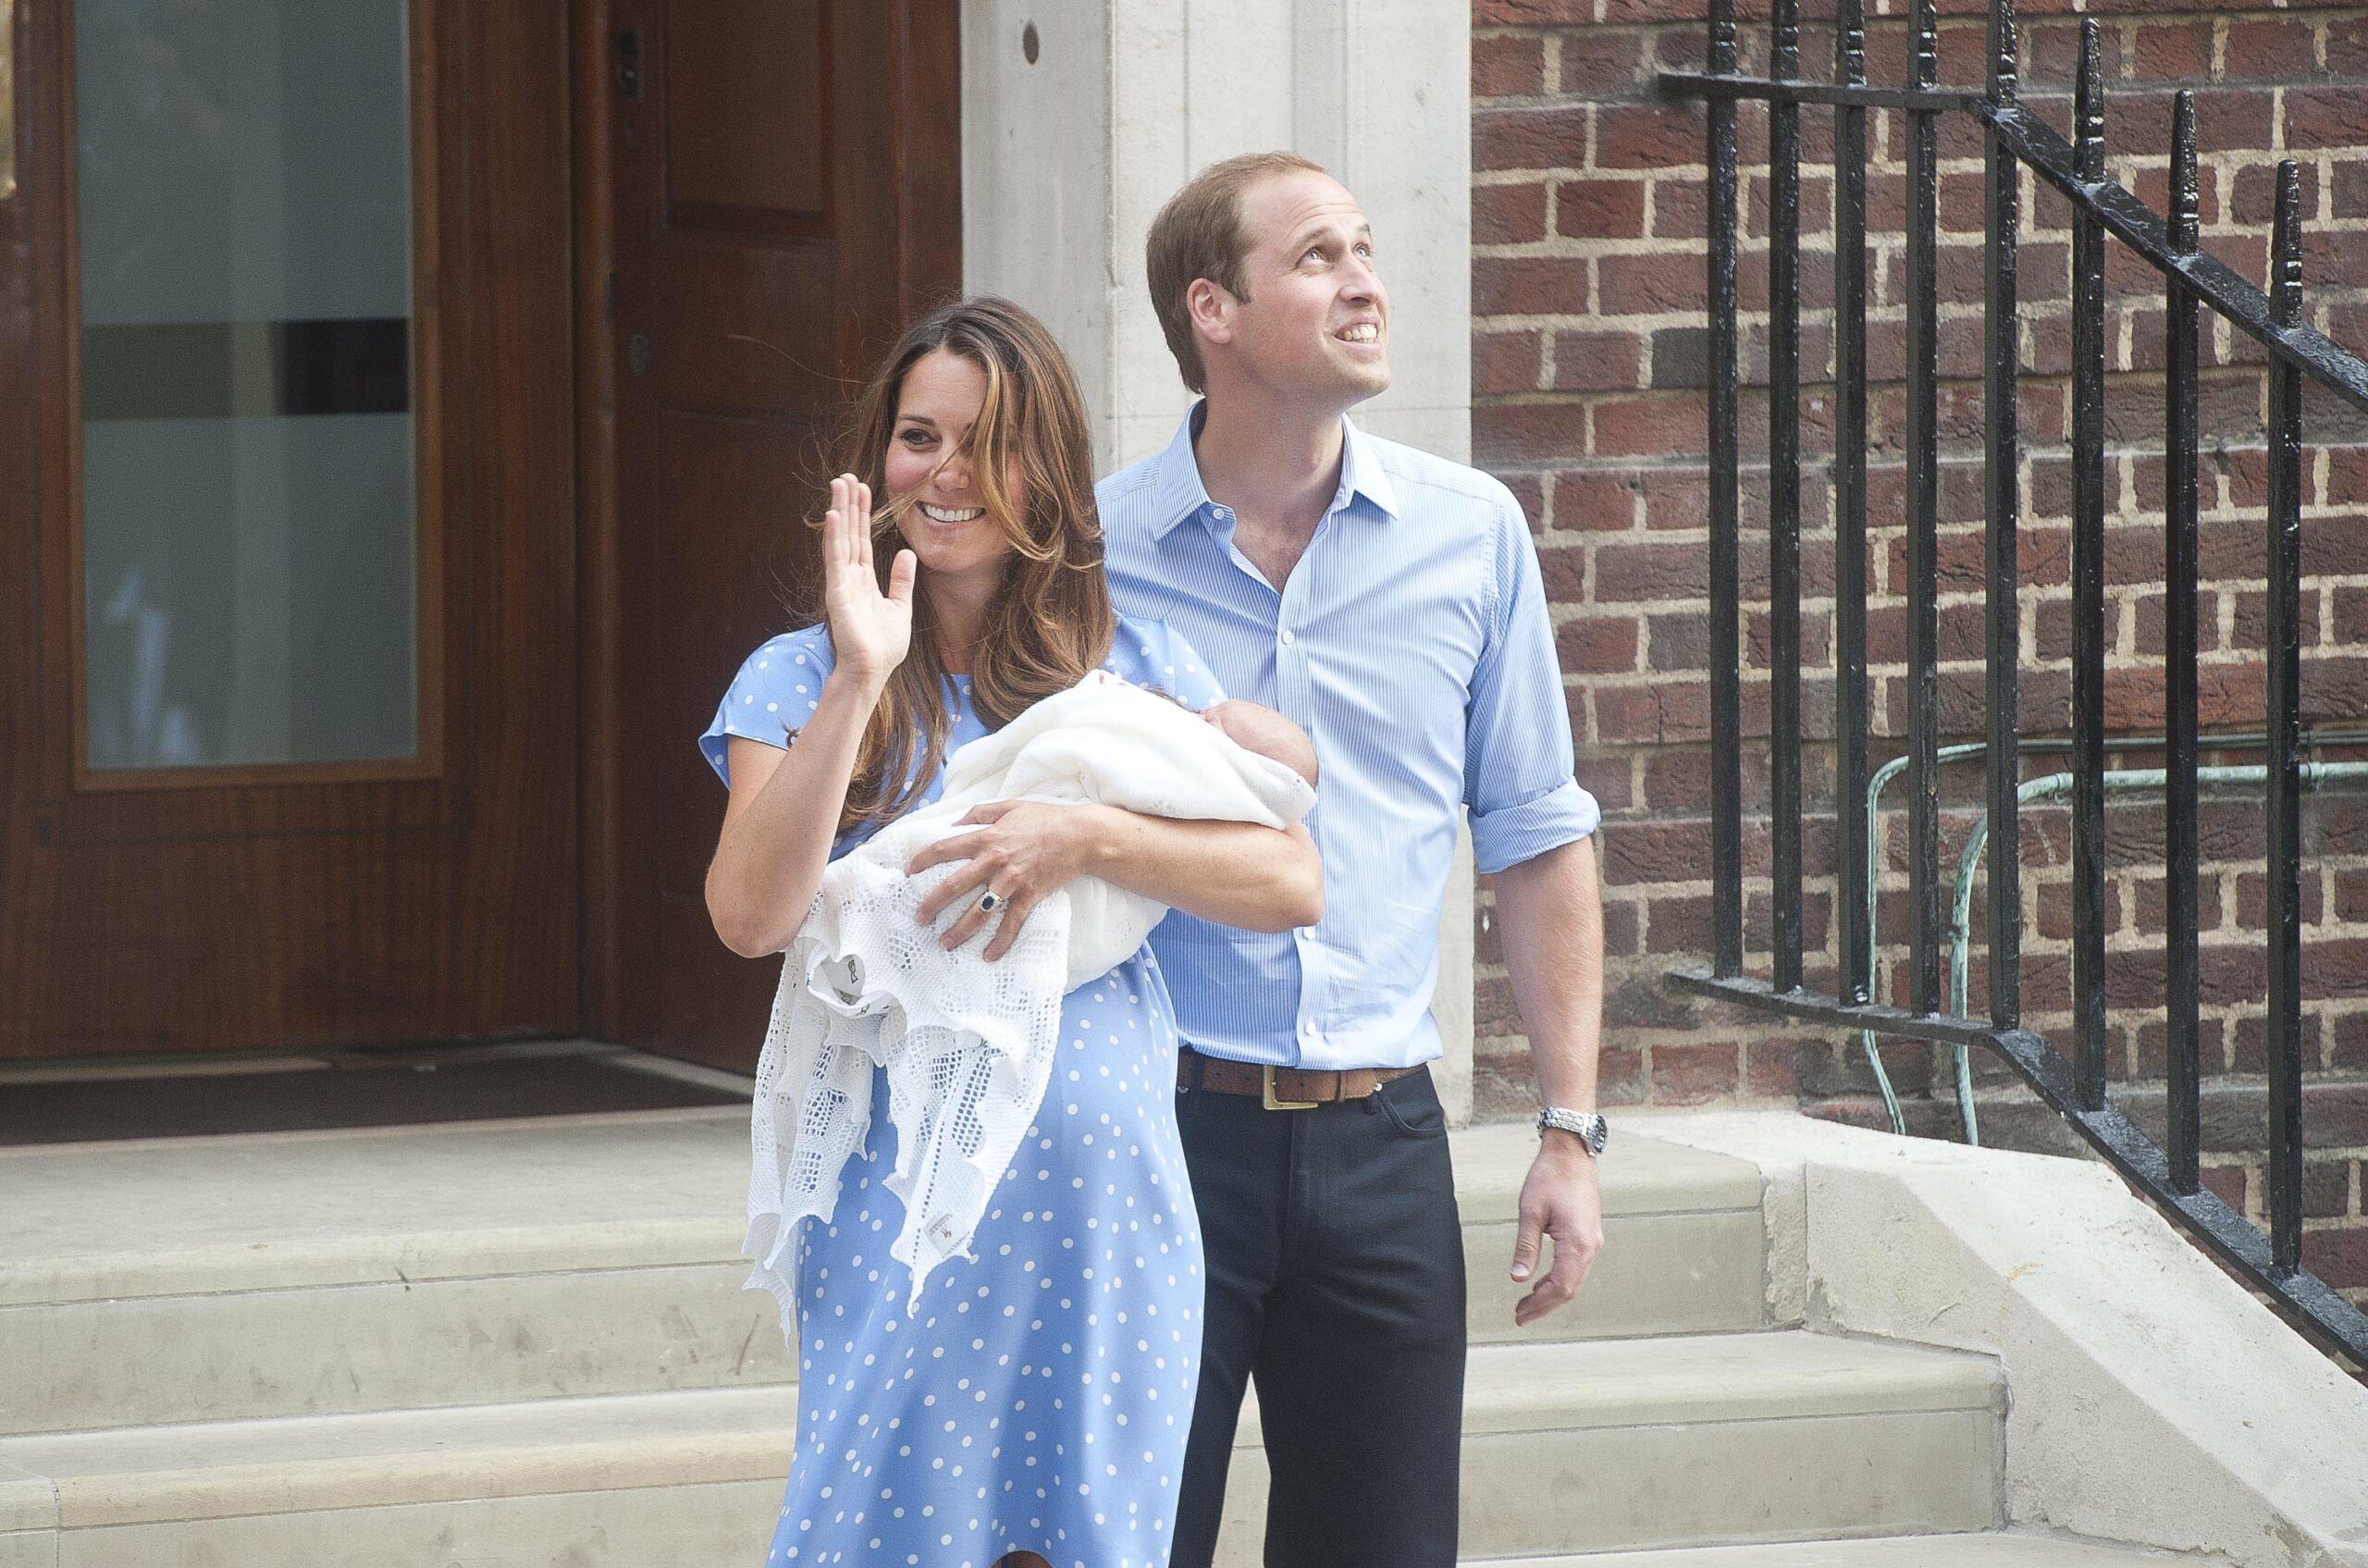 Kate Middleton and Prince William with Prince George on July 22, 2013